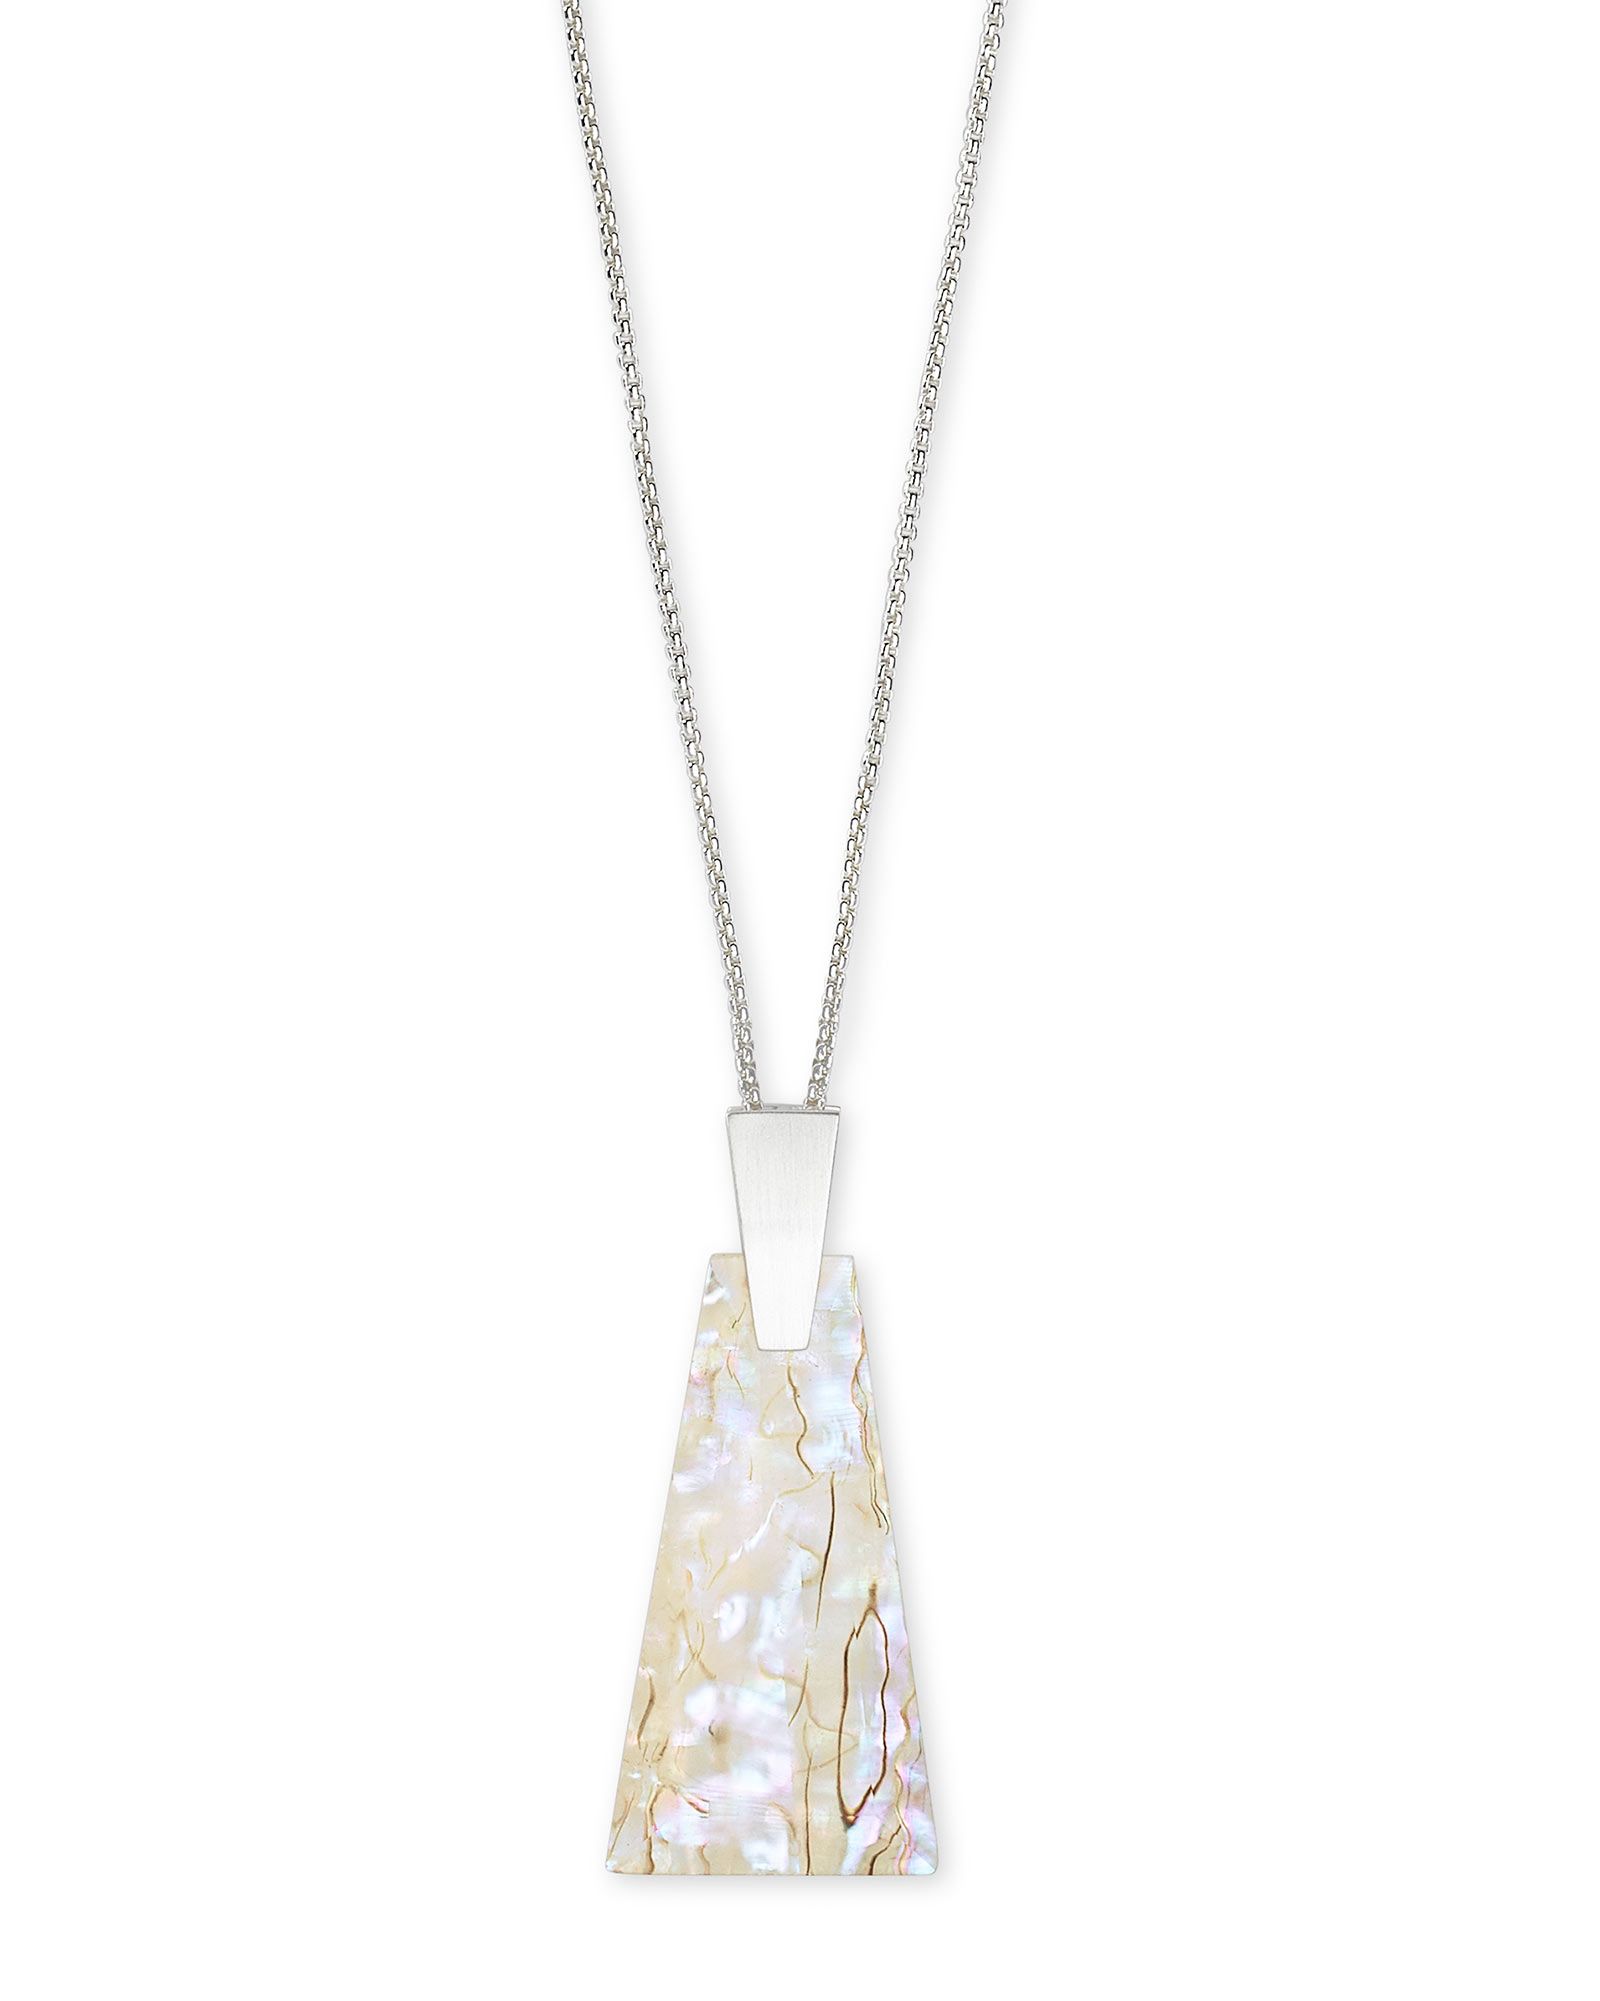 Collins Bright Silver Long Pendant Necklace in White Abalone | Kendra Scott